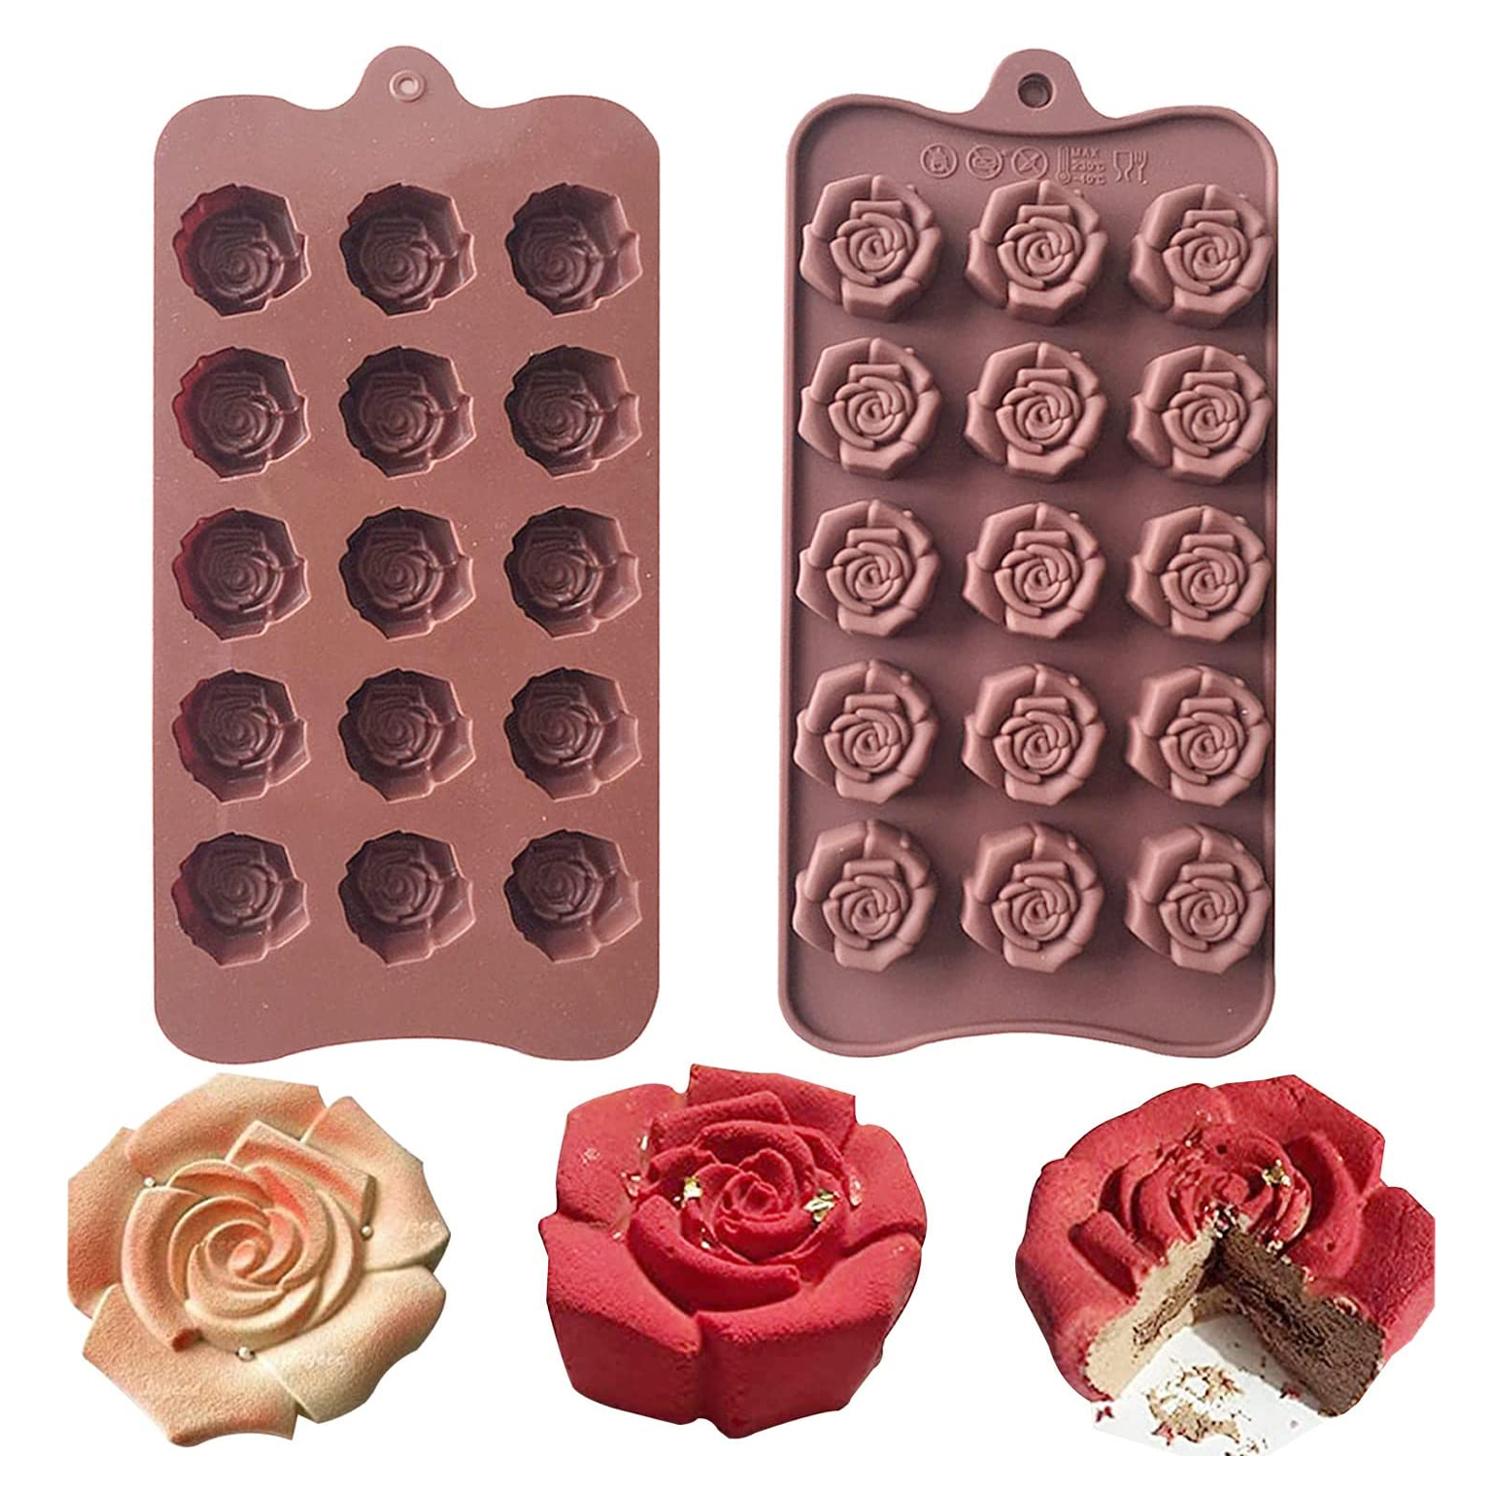 SCM0001 CHOCOLATE SILICONE MOULD ROSES